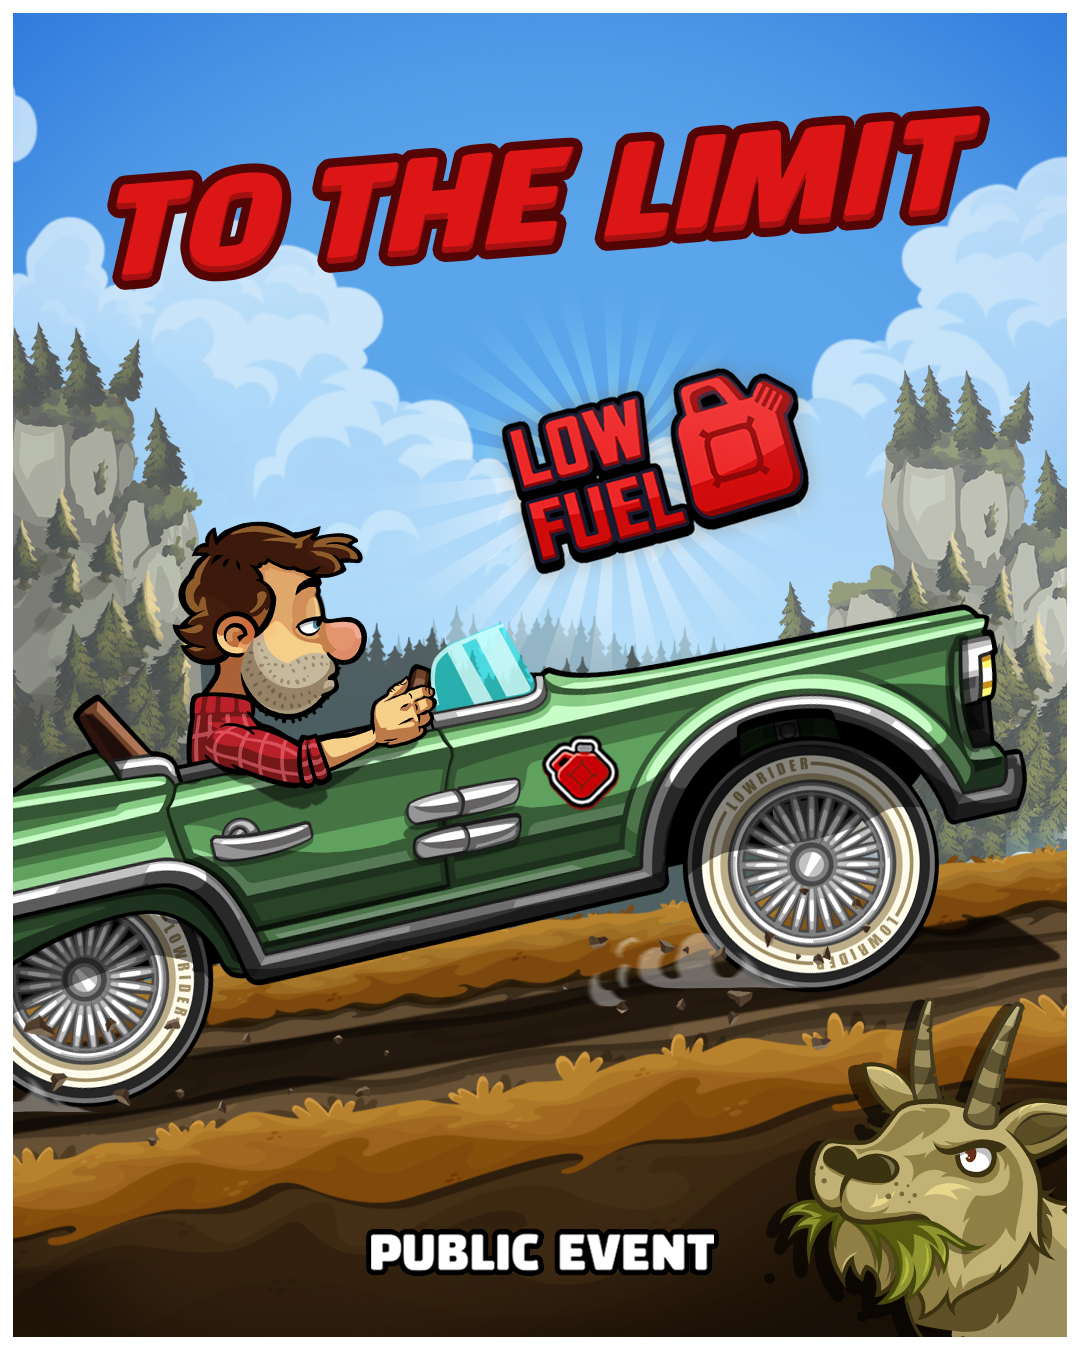 Hill Climb Racing 2 earns 15 million monthly installs, and is